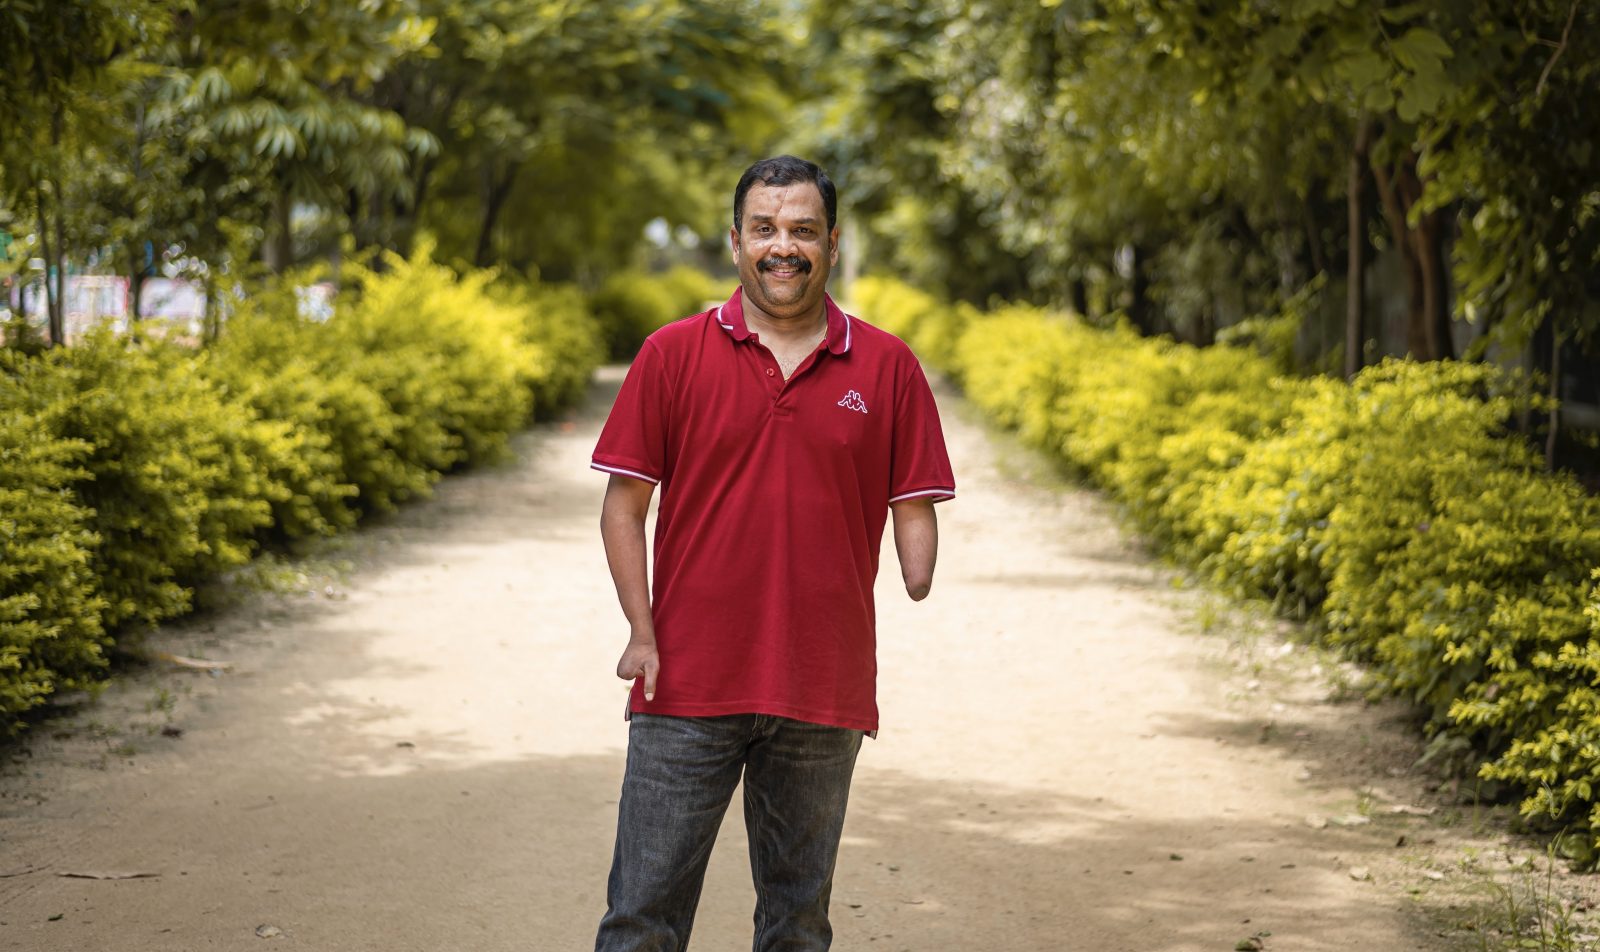 a man wearing a red t-shirt standing on a pathway lined with hedges and trees